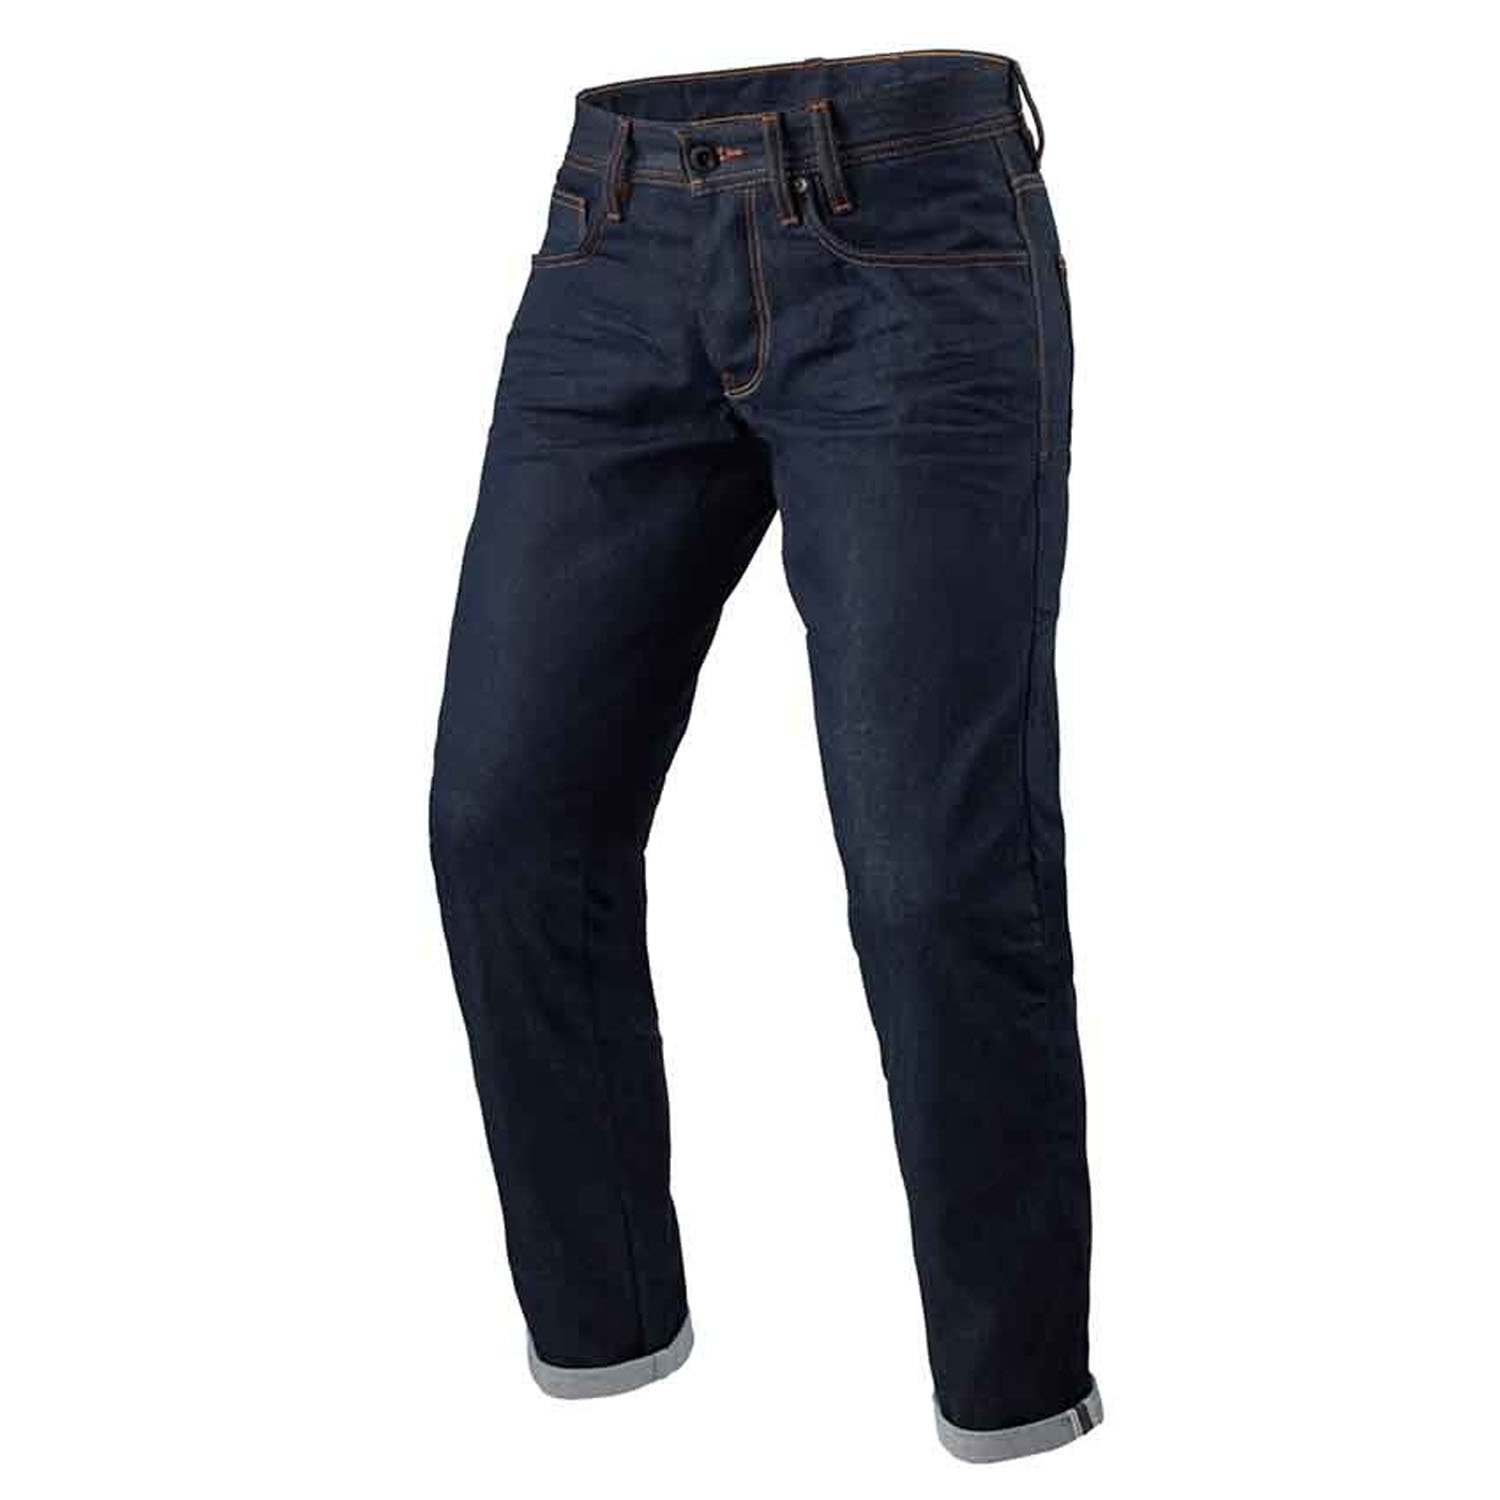 Image of REV'IT! Jeans Lewis Selvedge TF Dark Blue L36 Motorcycle Pants Size L36/W33 ID 8700001358125